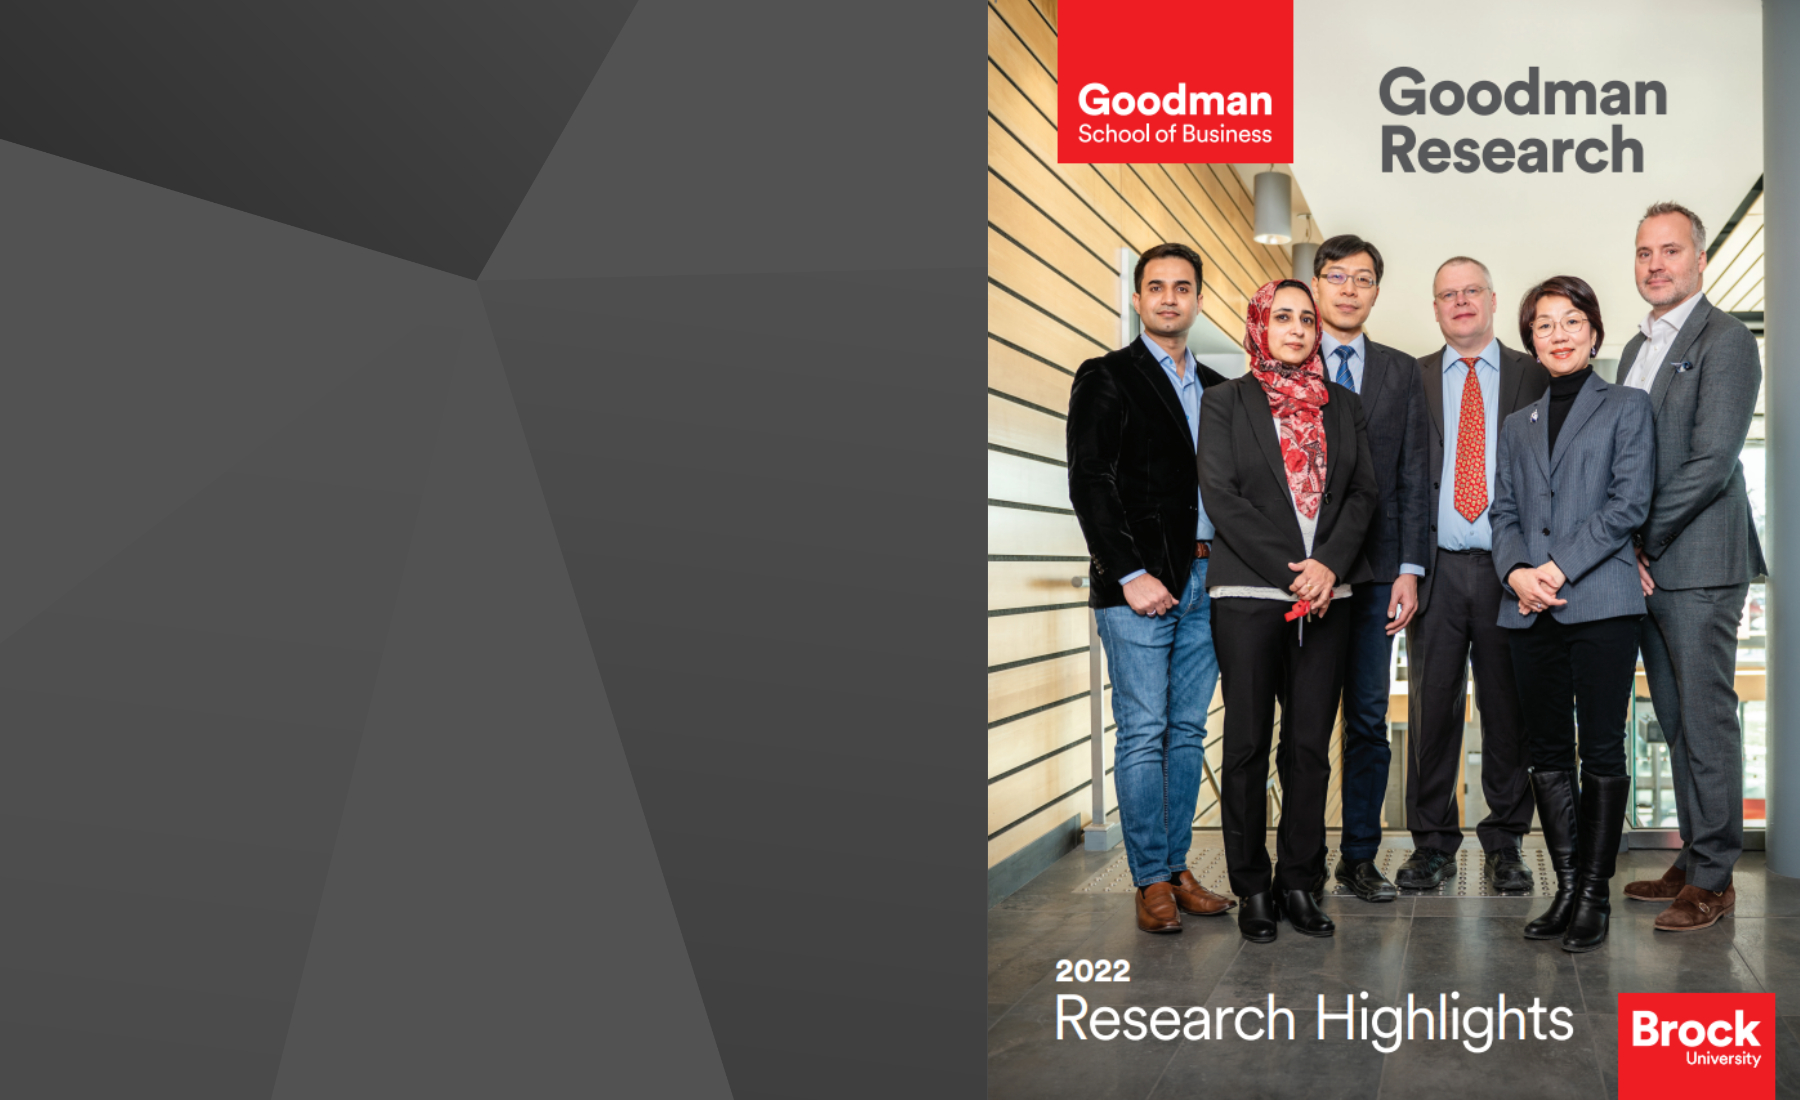 Grey geometric background with cover photo of the Goodman research brochure (6 researchers standing) 